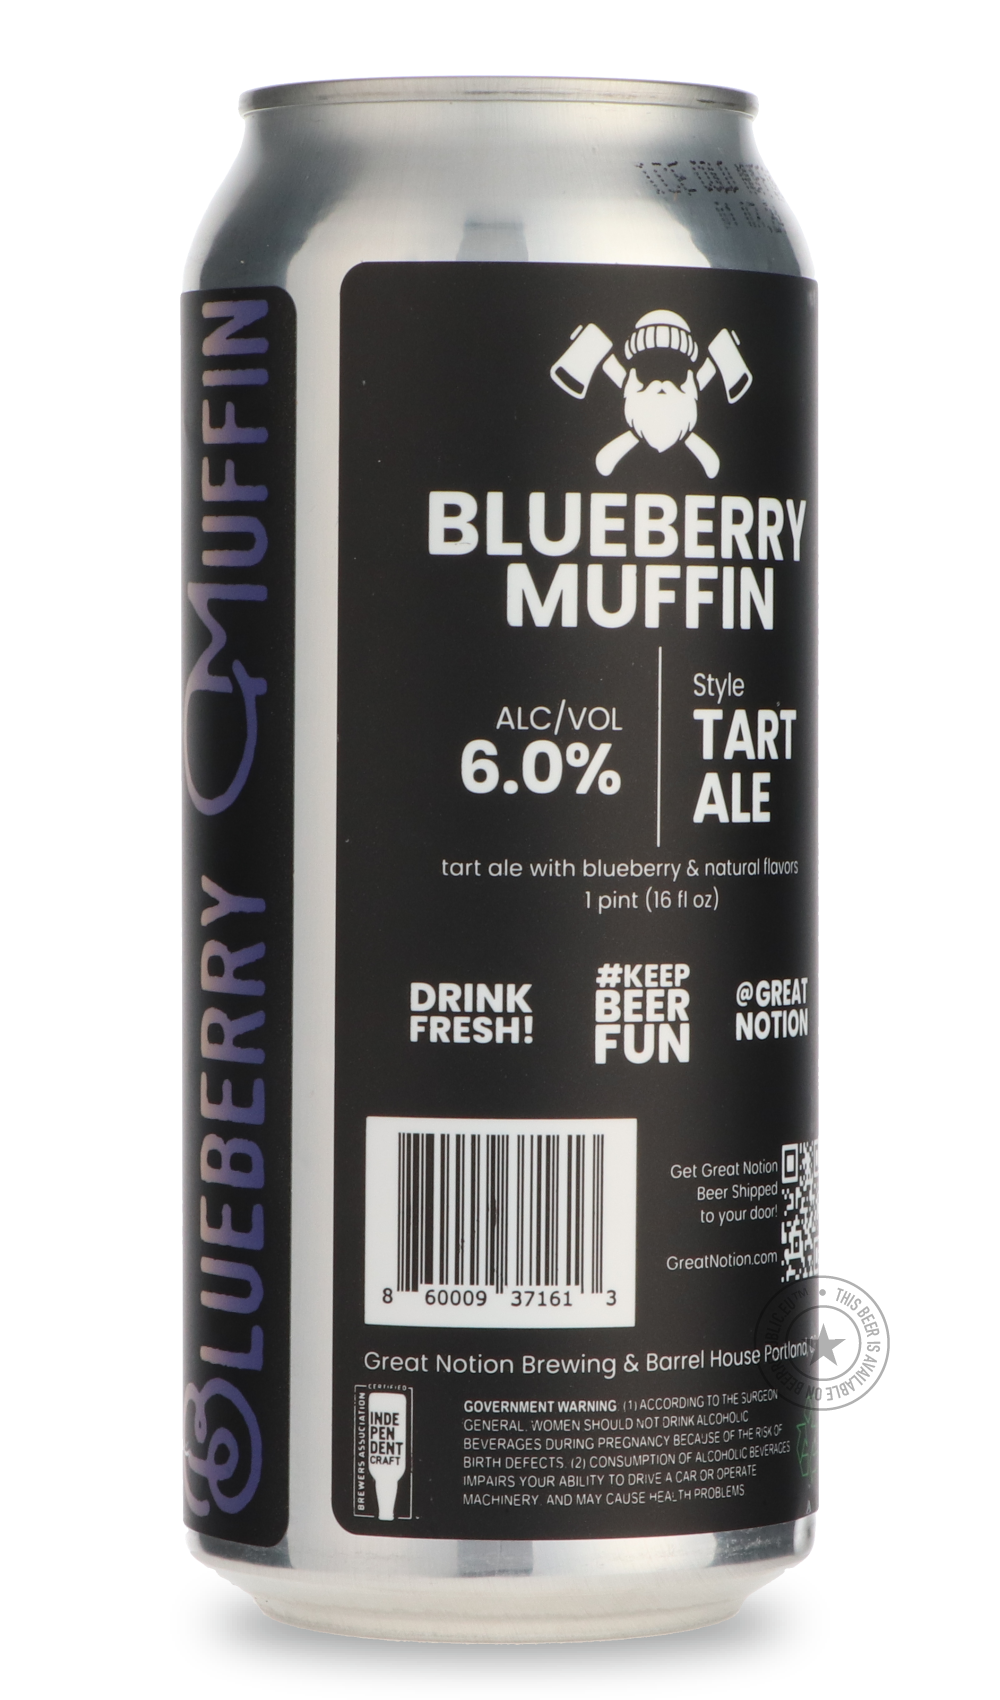 -Great Notion- Blueberry Muffin-Sour / Wild & Fruity- Only @ Beer Republic - The best online beer store for American & Canadian craft beer - Buy beer online from the USA and Canada - Bier online kopen - Amerikaans bier kopen - Craft beer store - Craft beer kopen - Amerikanisch bier kaufen - Bier online kaufen - Acheter biere online - IPA - Stout - Porter - New England IPA - Hazy IPA - Imperial Stout - Barrel Aged - Barrel Aged Imperial Stout - Brown - Dark beer - Blond - Blonde - Pilsner - Lager - Wheat - W